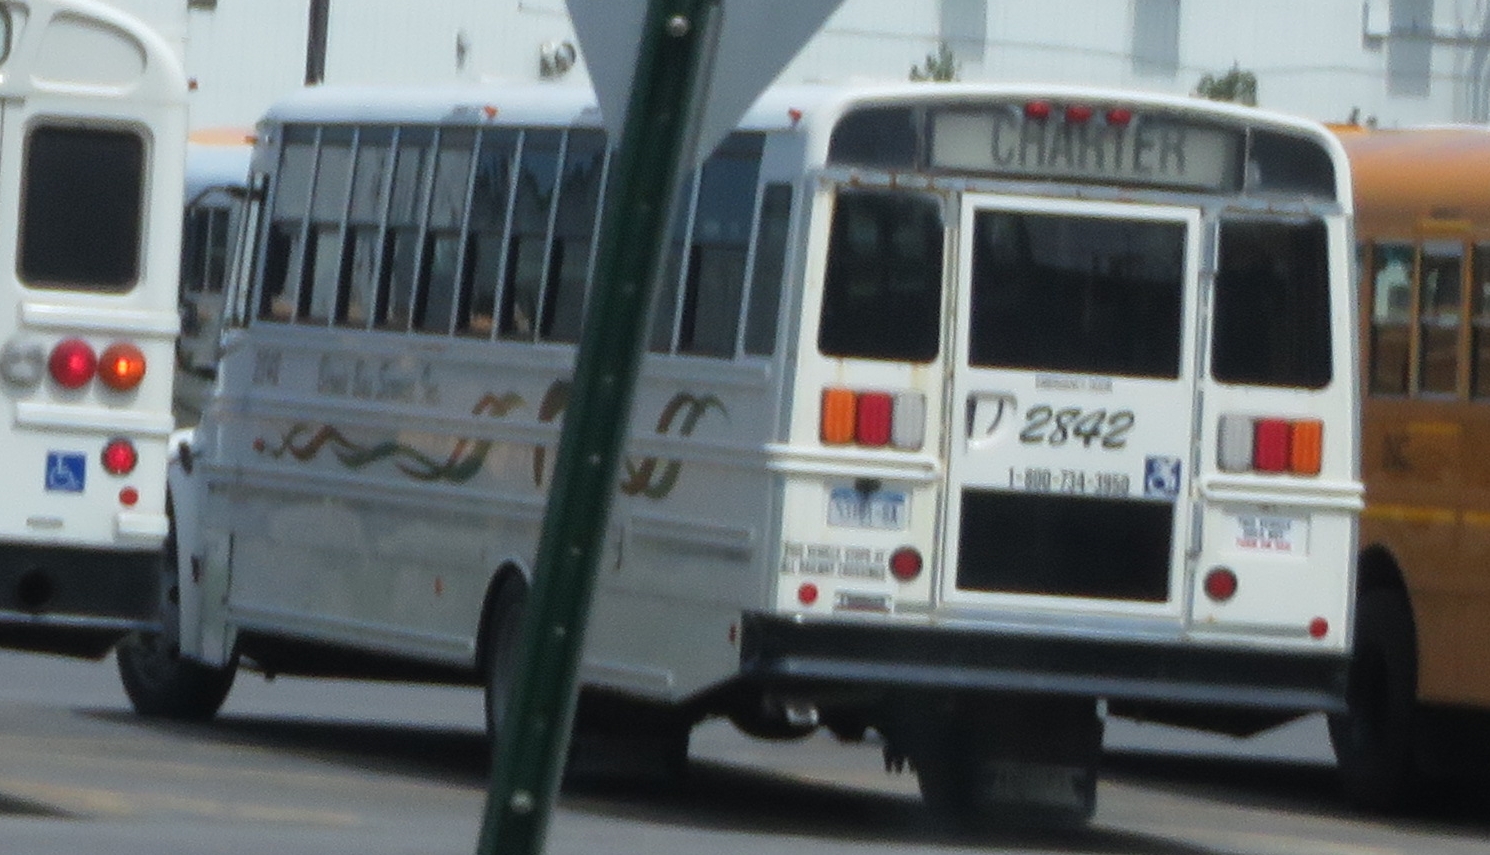 two public transit buses sit on the street